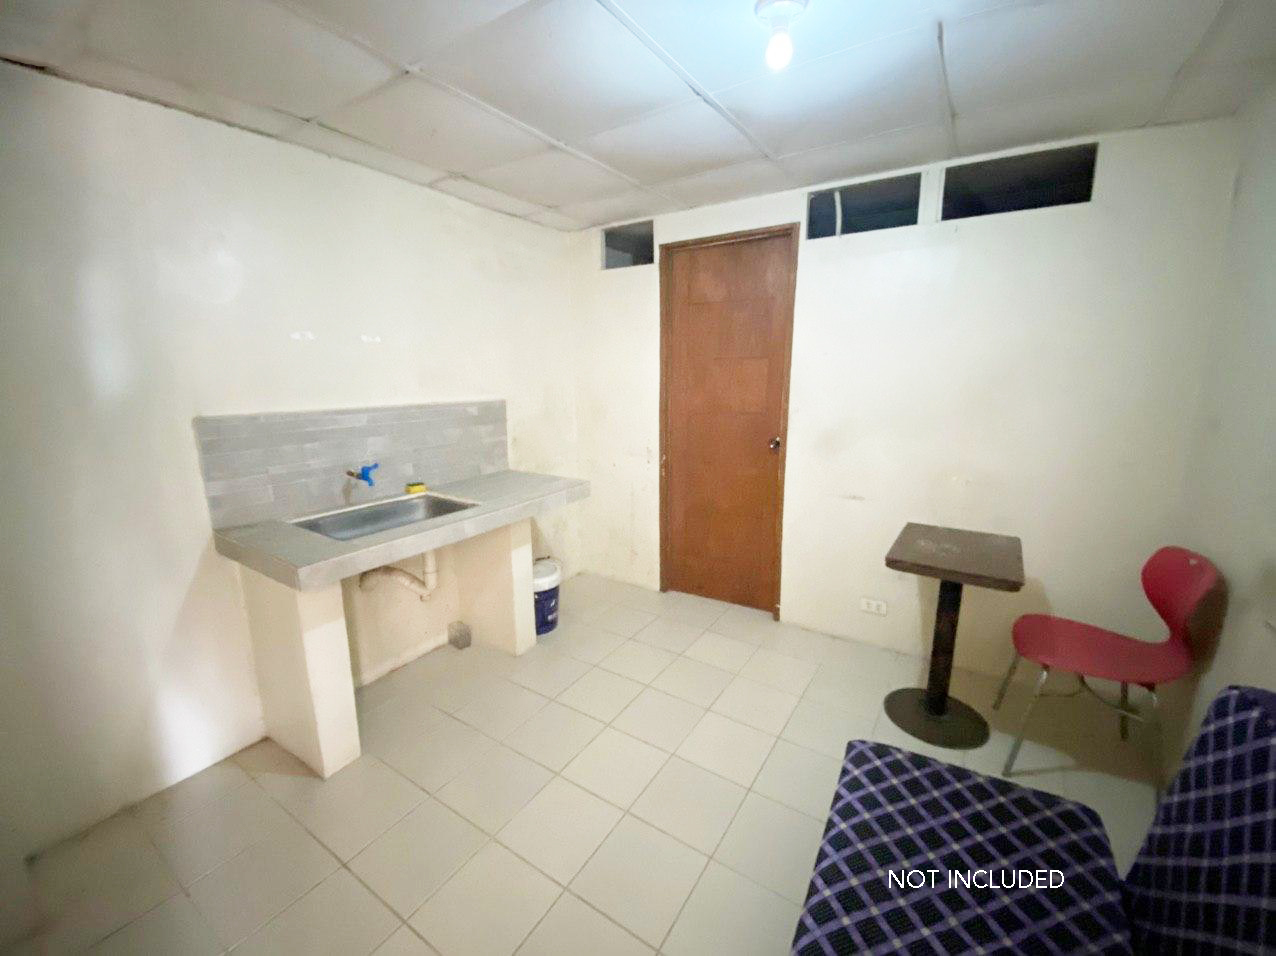 1 Bed Room Apartment Unit for Rent in San Fernando Pampanga